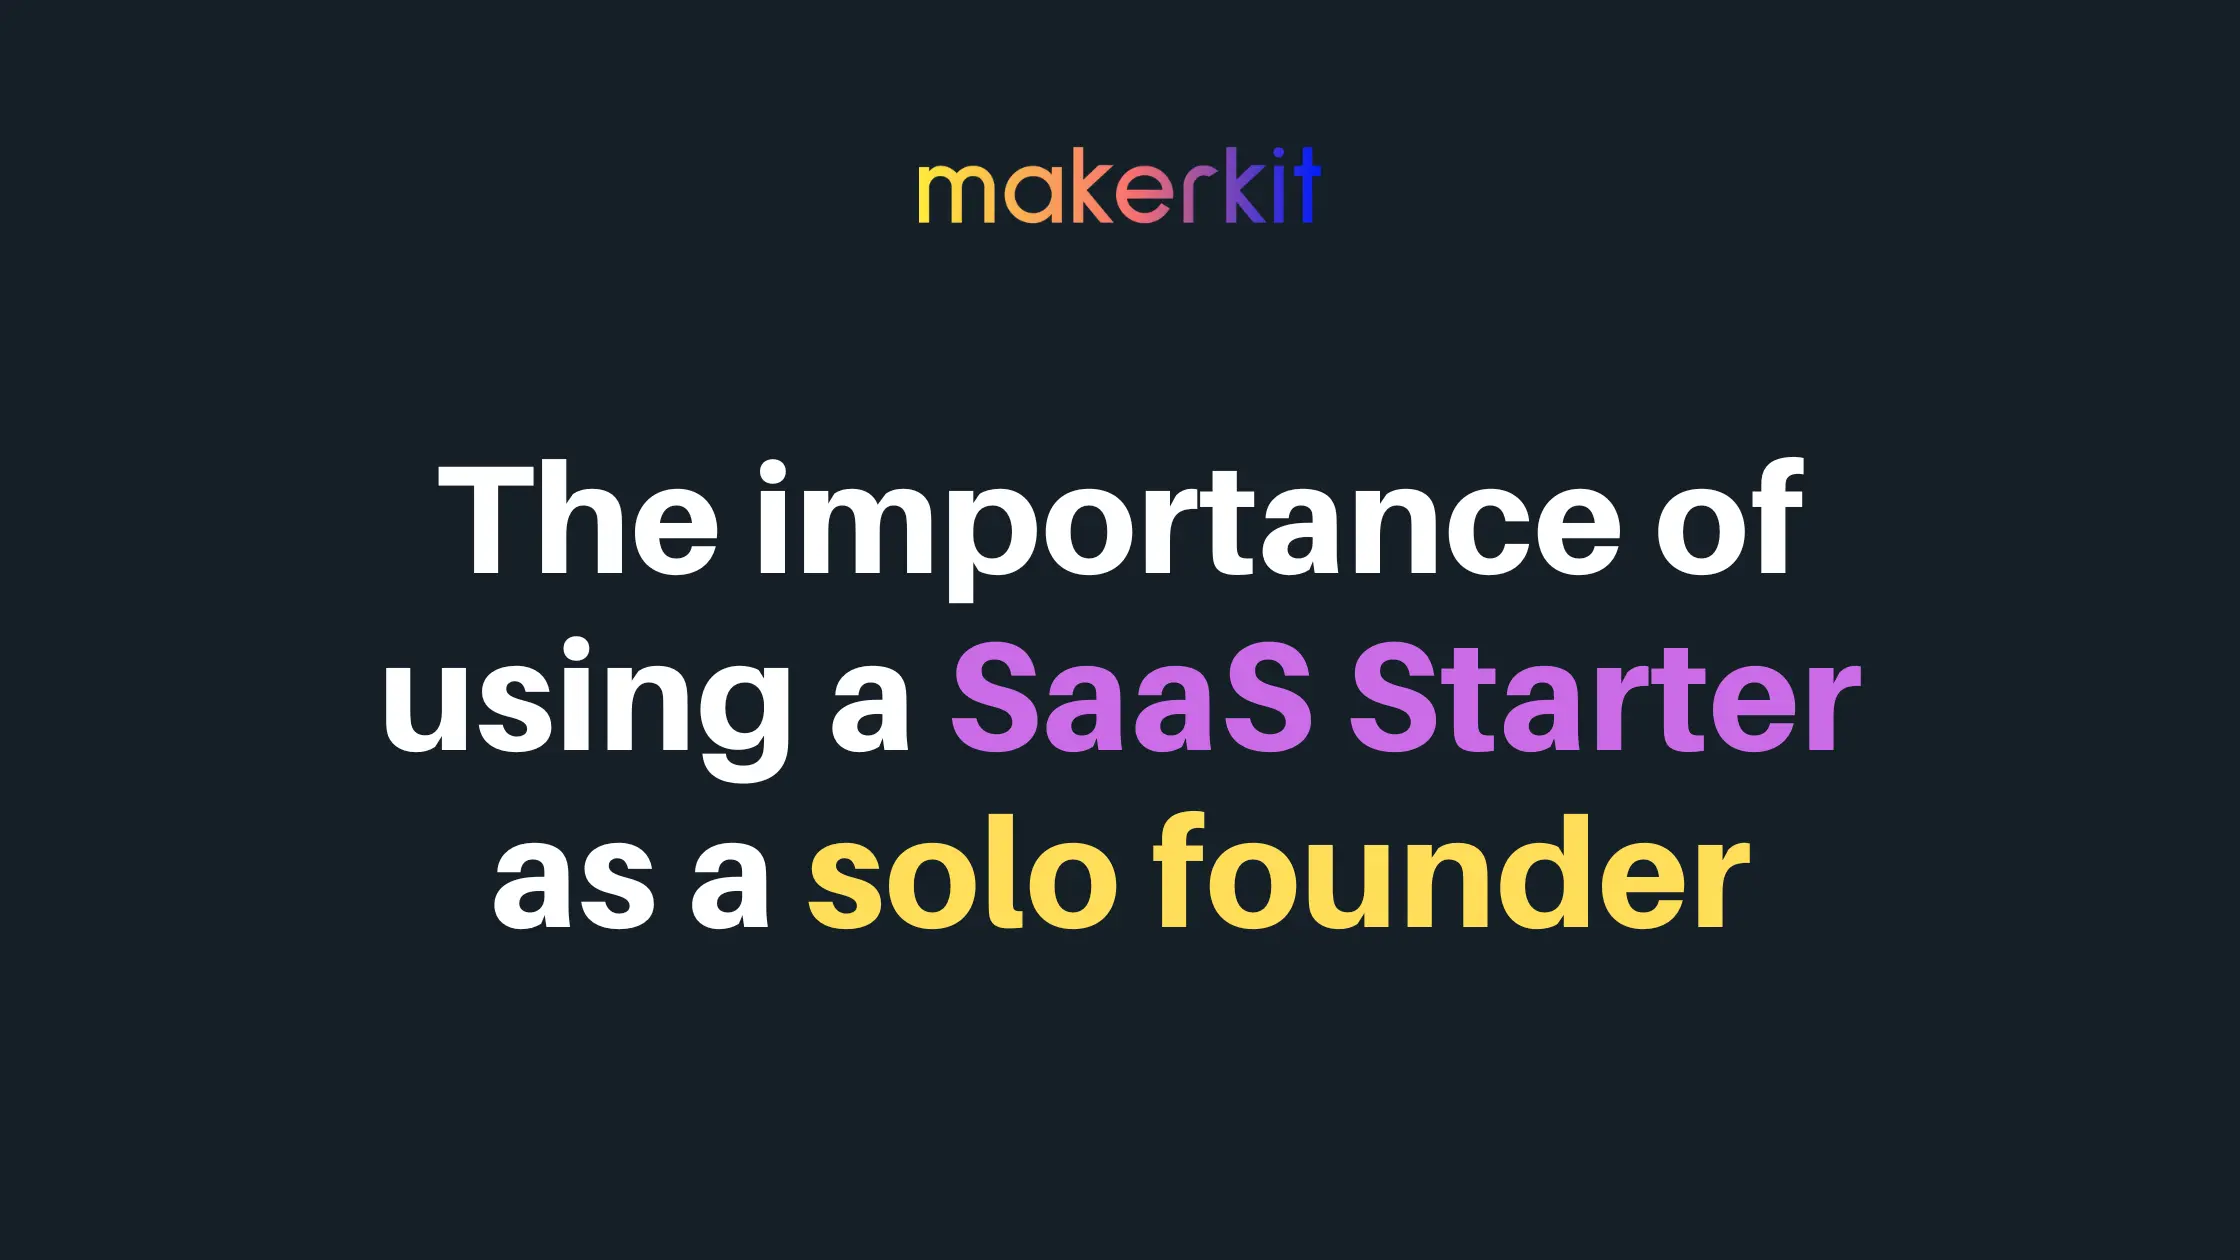 Cover Image for The importance of using a SaaS Starter as a solo founder